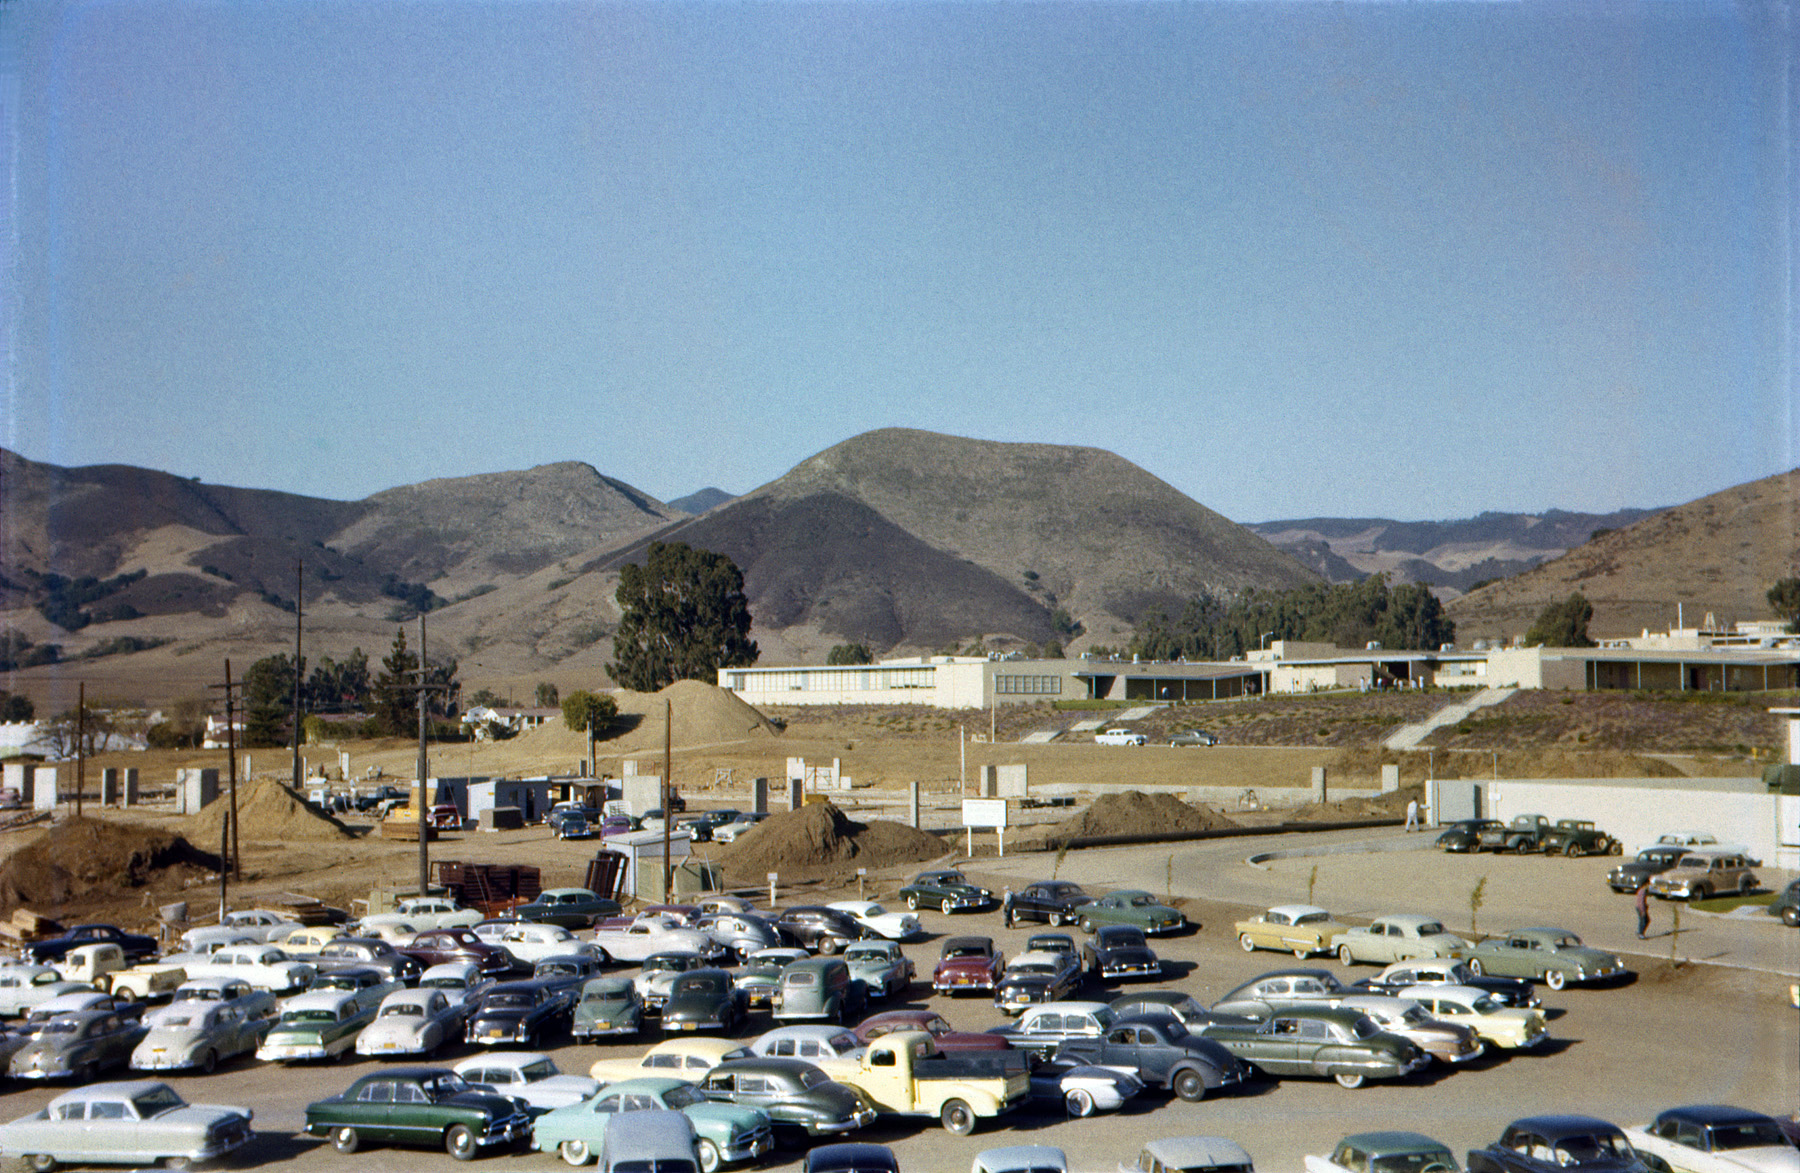 Back in October 1956, my brother shot this Ektachrome slide to show the construction of the new Engineering Building at Cal Poly, and a student parking lot just happened to be in the foreground. Today it looks like a vintage car rally. For extra points: spot the Corvette. View full size.
